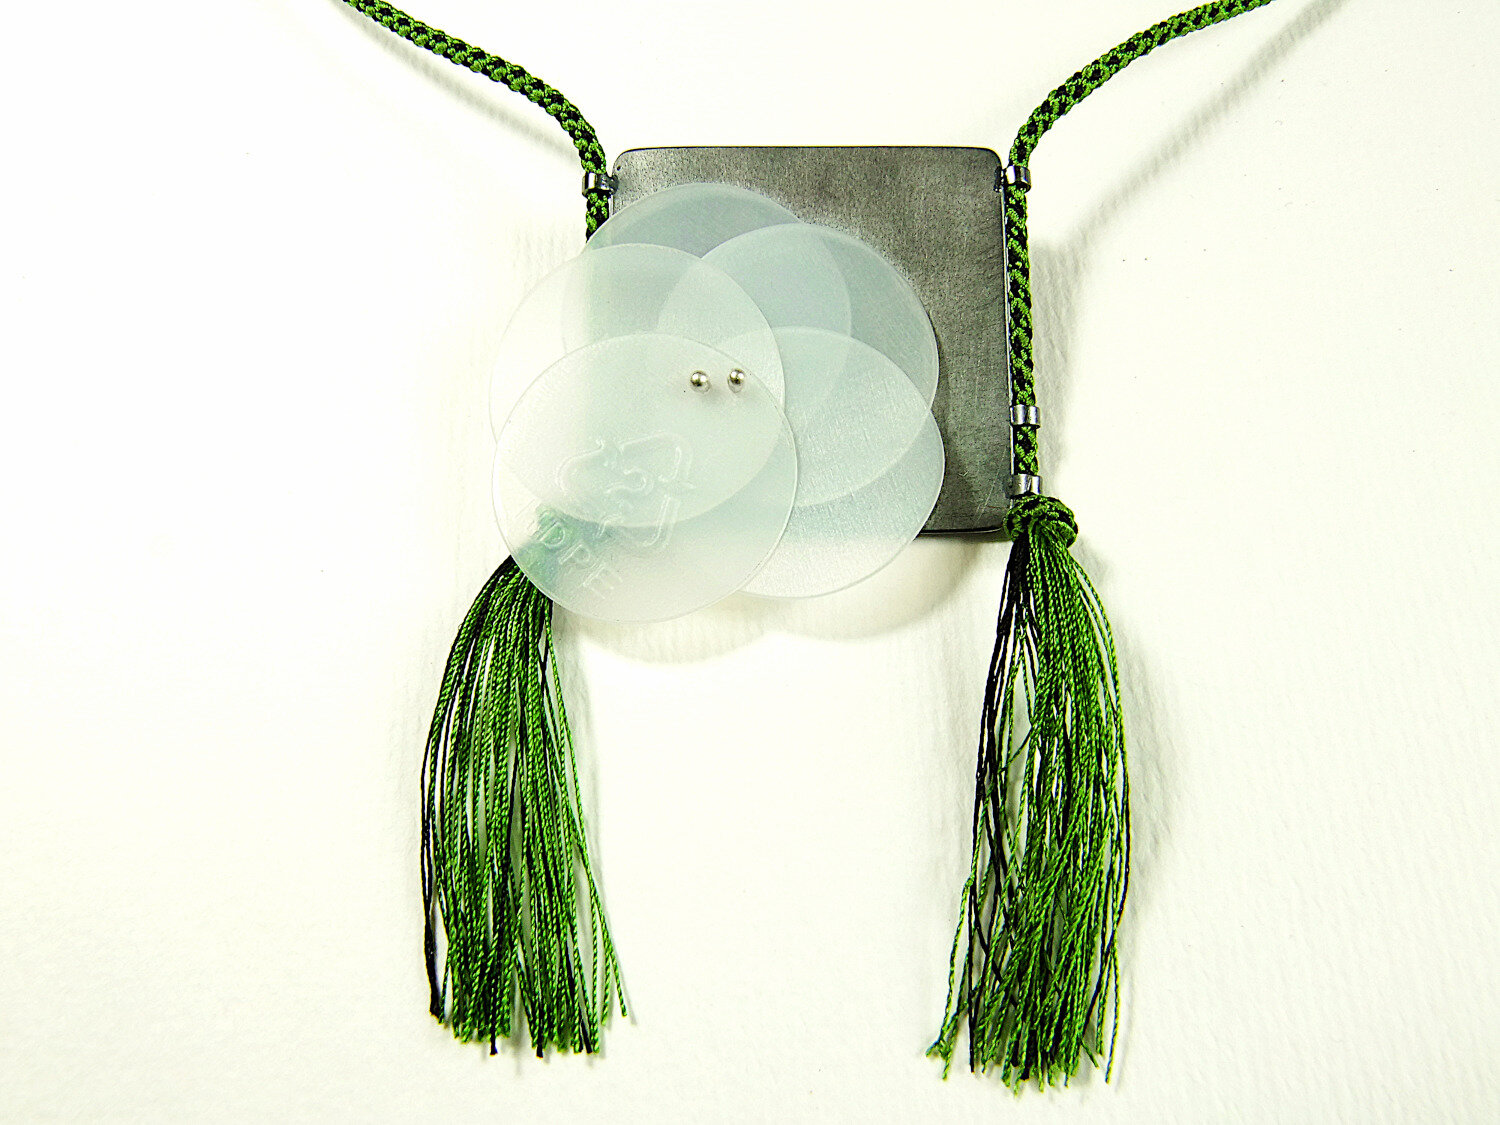 detail-green-kumihimo-neklace-silver-pendant-with-recycled-plastic-hbm107-8722.JPG